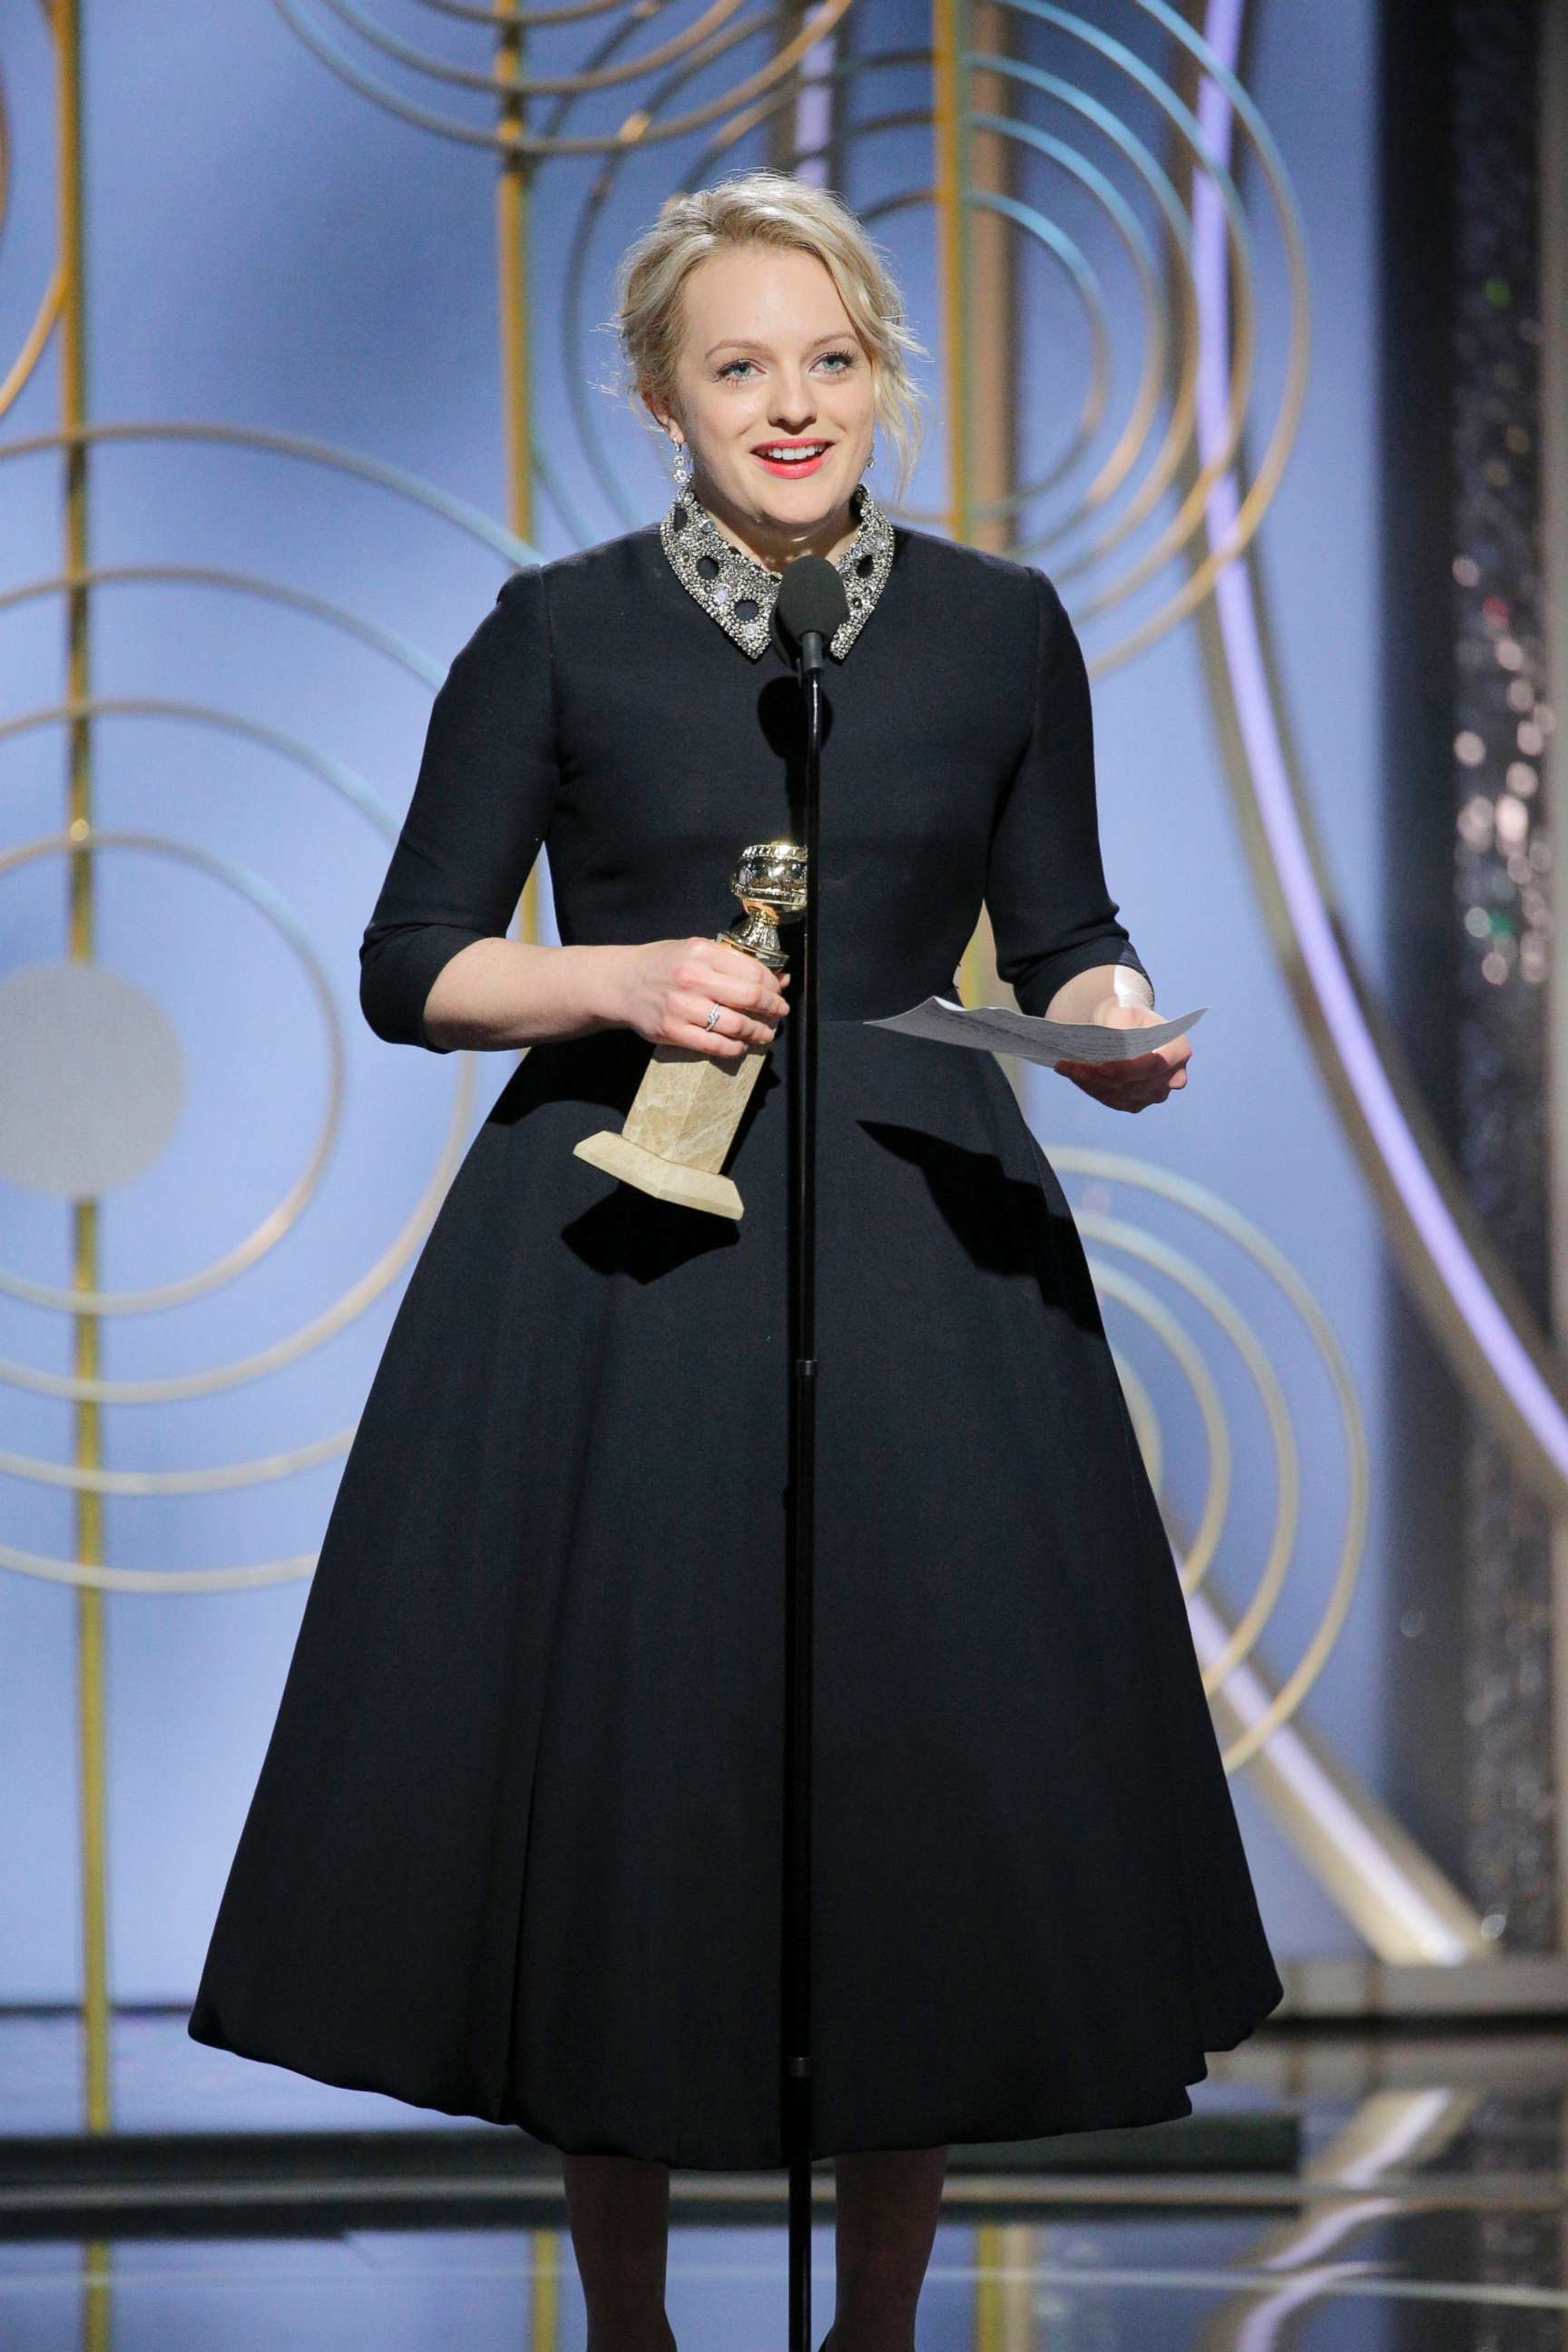 PHOTO; Elisabeth Moss accepts the Golden Globe for her role in "The Handmaid's Tale," Jan. 7, 2018, at the 75th annual Golden Globe Awards in Beverly Hills, Calif.